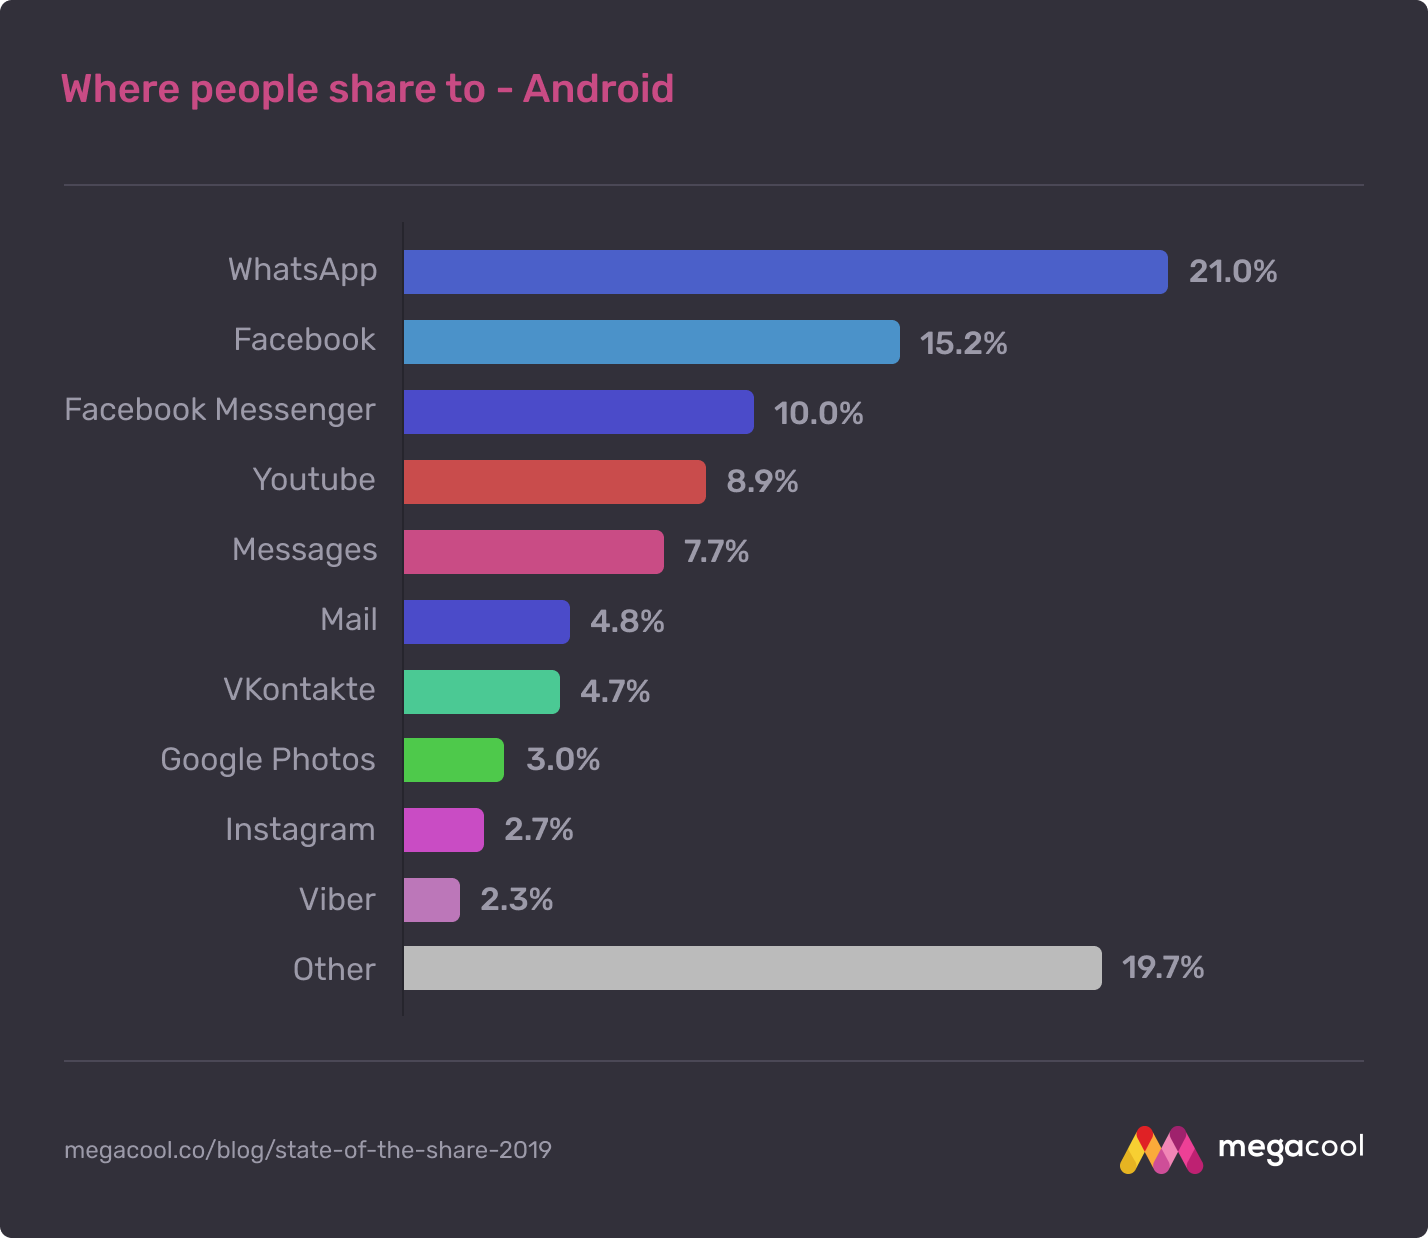 Most popular sharing destinations on Android, showing WhatsApp on top with 21%, Facebook at 15%, Messenger at 10%, then a gradual decrease through Youtube, Messages, Mail, and several others.